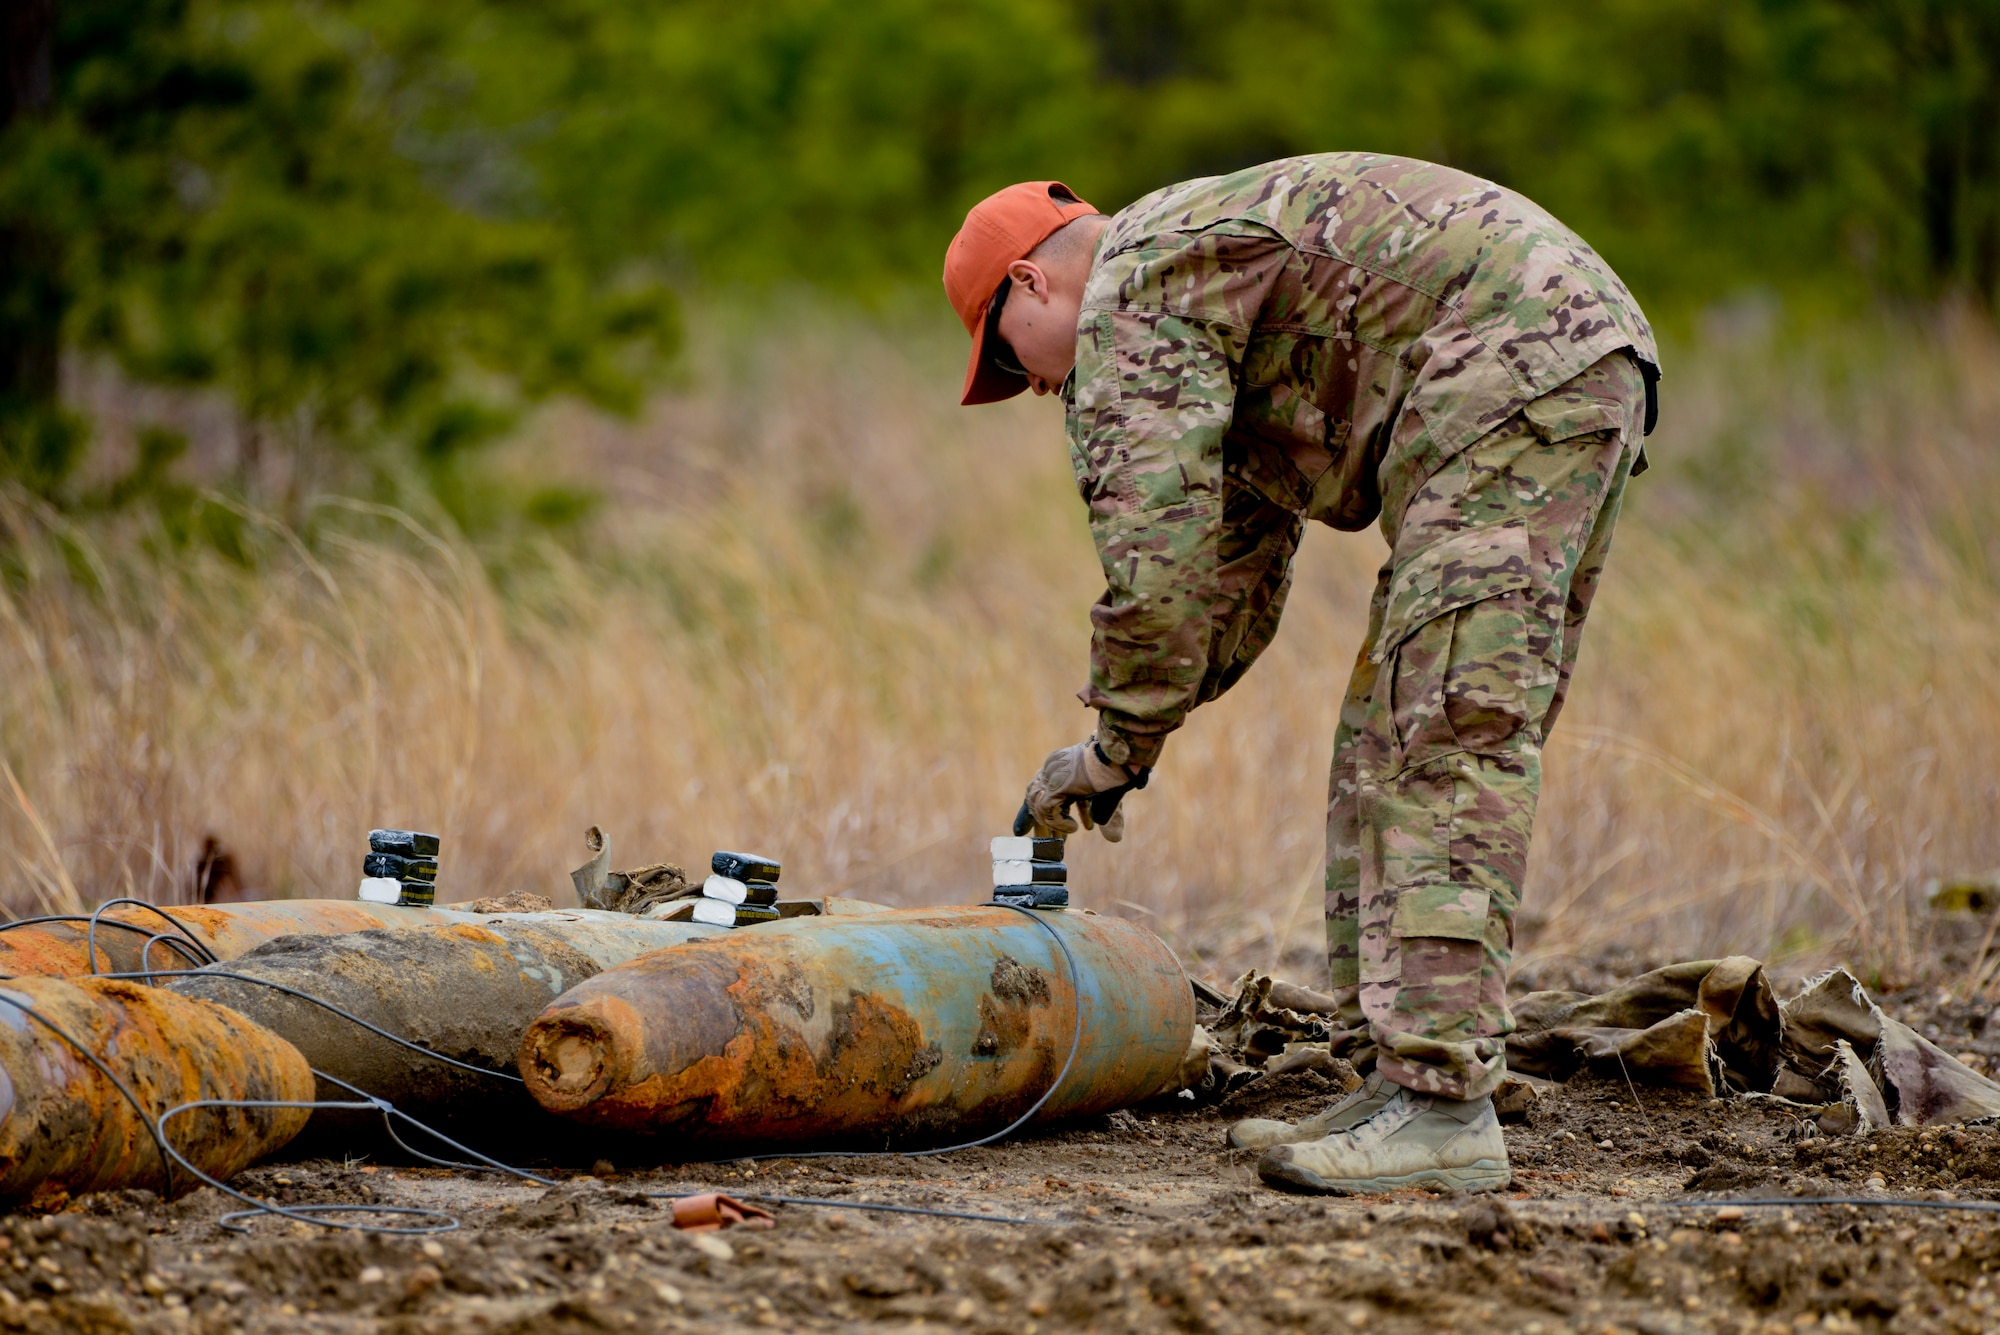 A picture of U.S. Air Force Airman 1st Class Michael Glisan, Explosives Ordnance Disposal Technician with the 87th Civil Engineering Squadron, Joint Base McGuire-Dix-Lakehurst, N.J., triple stacking C-4 explosives on used BDU-50 500 lb. concrete-filled practice bombs.